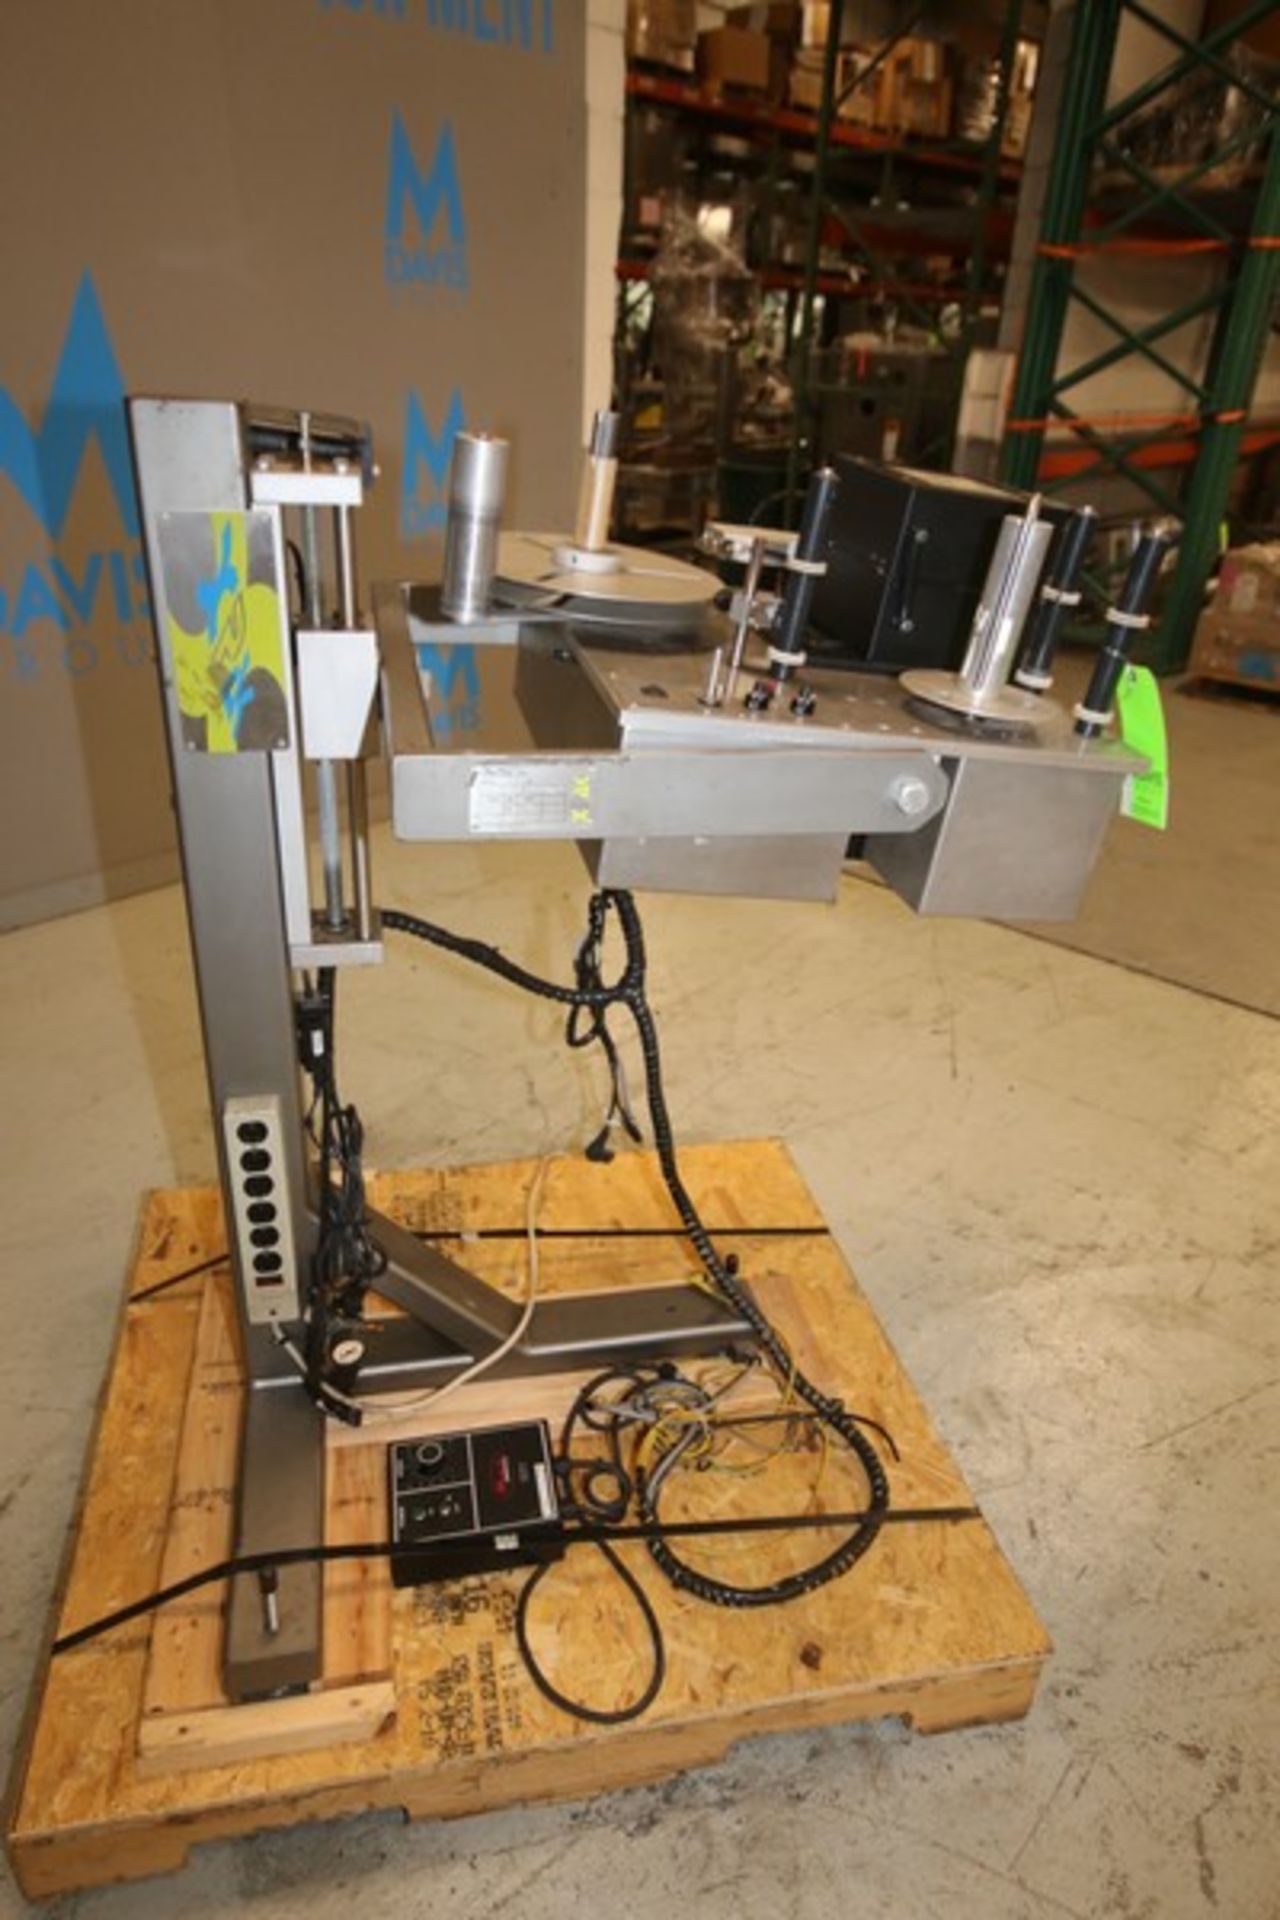 XPak Roll Fed Labeler, Model XP-A8200, SN SX052010, 115V, Mounted on Stand with Top Mounted Sato M- - Image 7 of 8